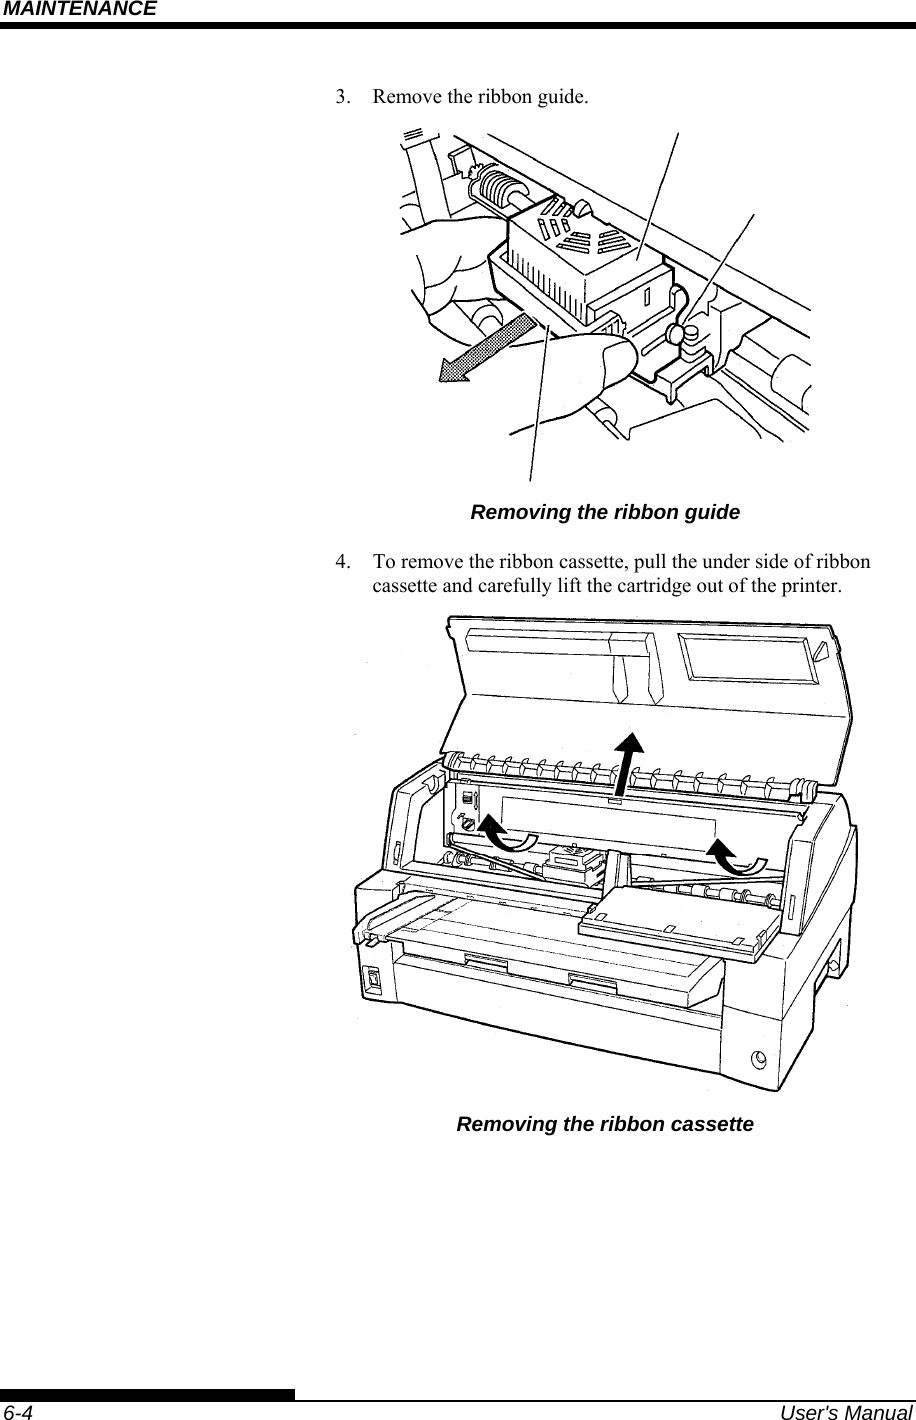 MAINTENANCE    6-4  User&apos;s Manual 3.  Remove the ribbon guide.  Removing the ribbon guide 4.  To remove the ribbon cassette, pull the under side of ribbon cassette and carefully lift the cartridge out of the printer.  Removing the ribbon cassette  